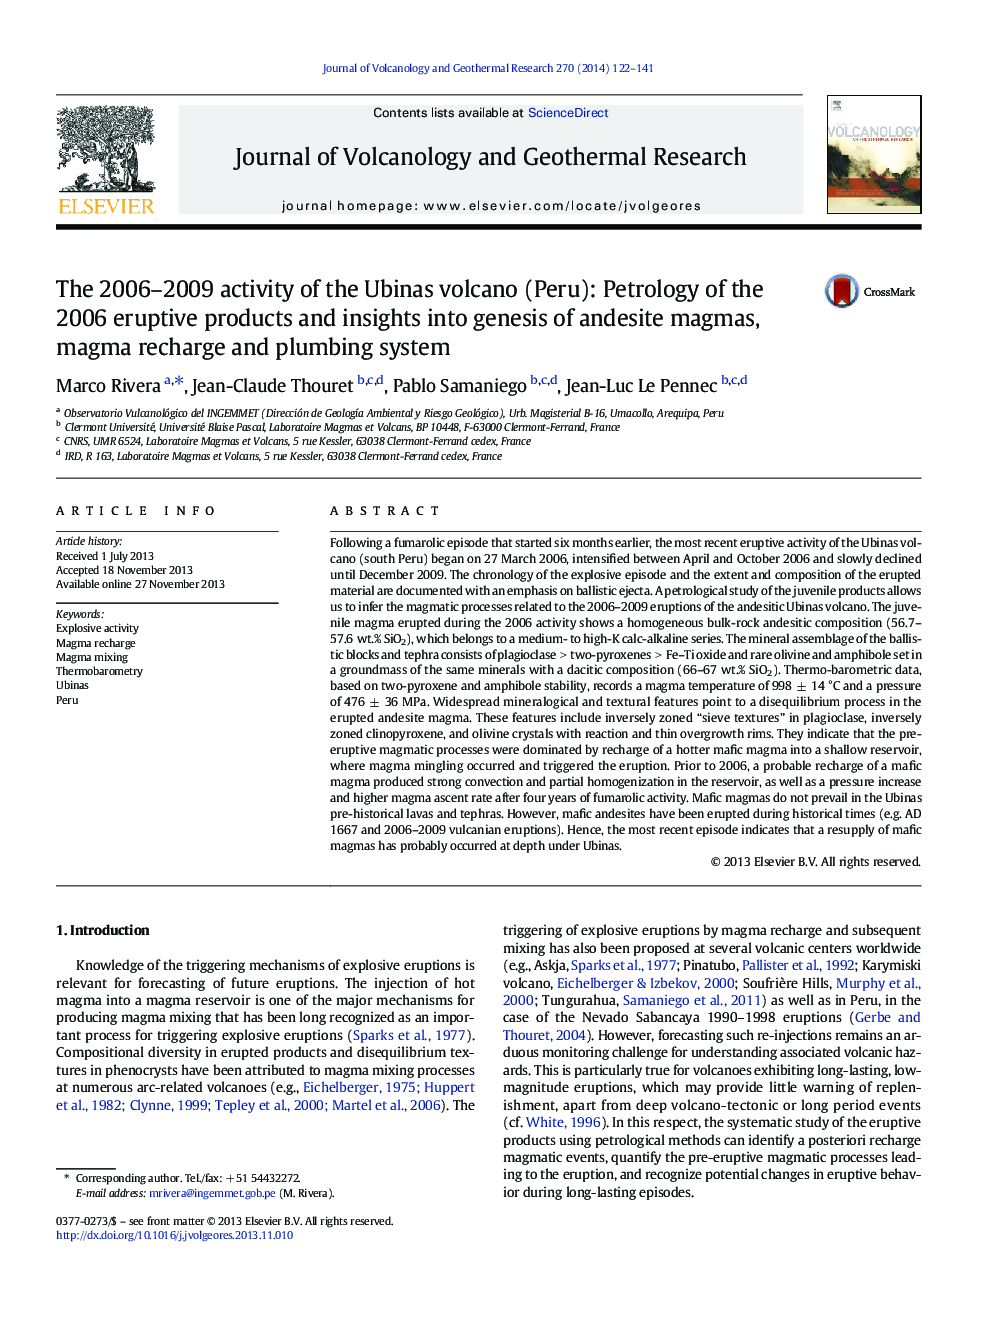 The 2006–2009 activity of the Ubinas volcano (Peru): Petrology of the 2006 eruptive products and insights into genesis of andesite magmas, magma recharge and plumbing system